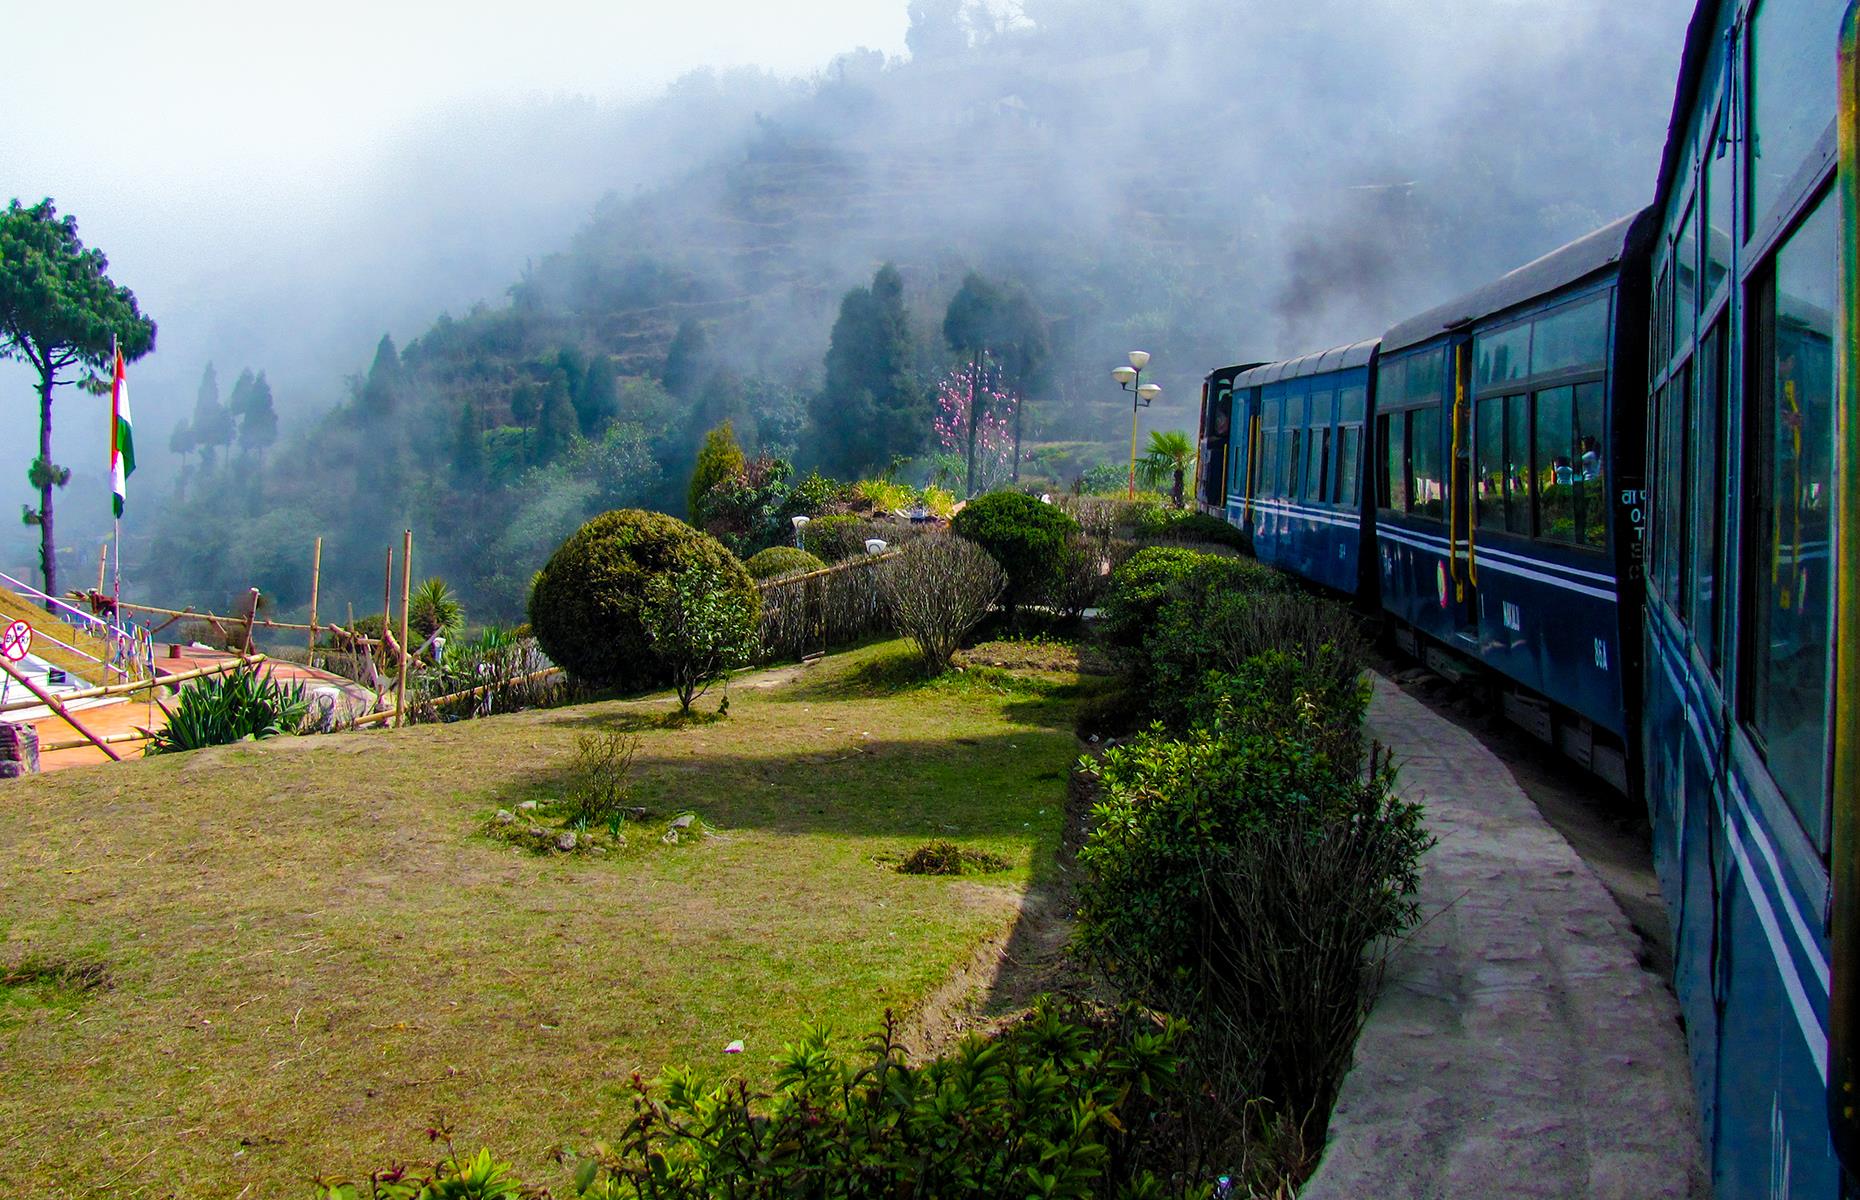 <p>The pretty Indian tea town of Darjeeling is not only worth visiting in its own right, but also for the chance to take a scenic railway journey through the foothills of the Himalayas. While the full route, from New Jalpaiguri, is served by a modern diesel engine, for a more romantic experience try the two-hour Darjeeling-Ghum tourist service, operated by steam train. </p>  <p><a href="https://www.loveexploring.com/galleries/86683/the-worlds-most-scenic-train-journeys-that-dont-cost-a-fortune?page=1"><strong>Take a look at more of the world's most scenic train journeys that don't cost a fortune</strong></a></p>